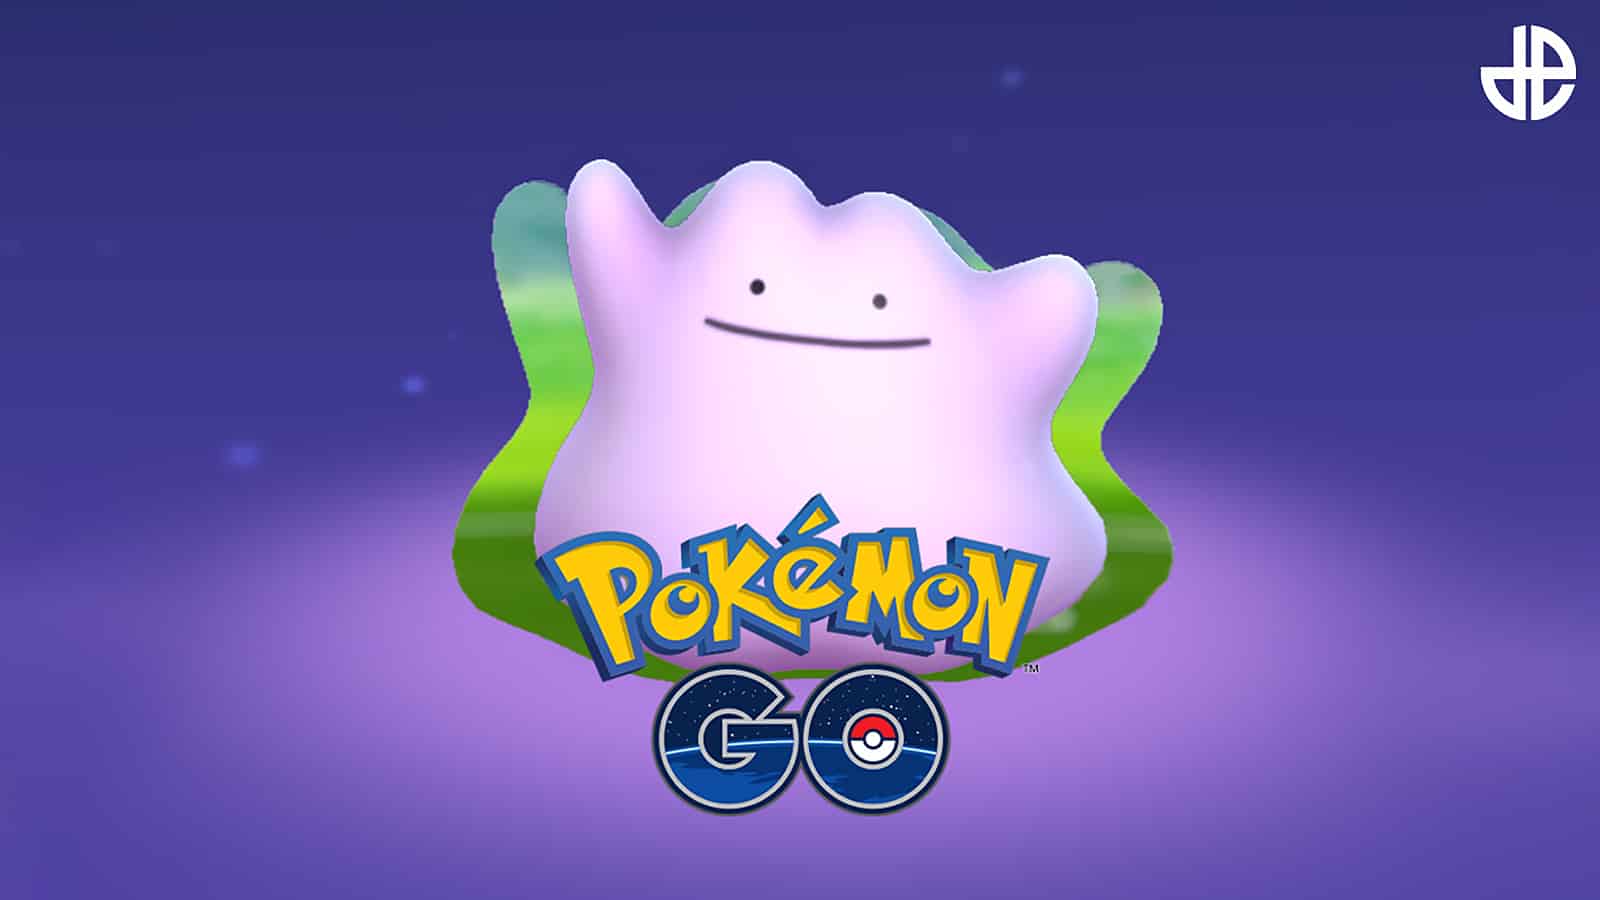 DITTO - The same, me too, I agree by